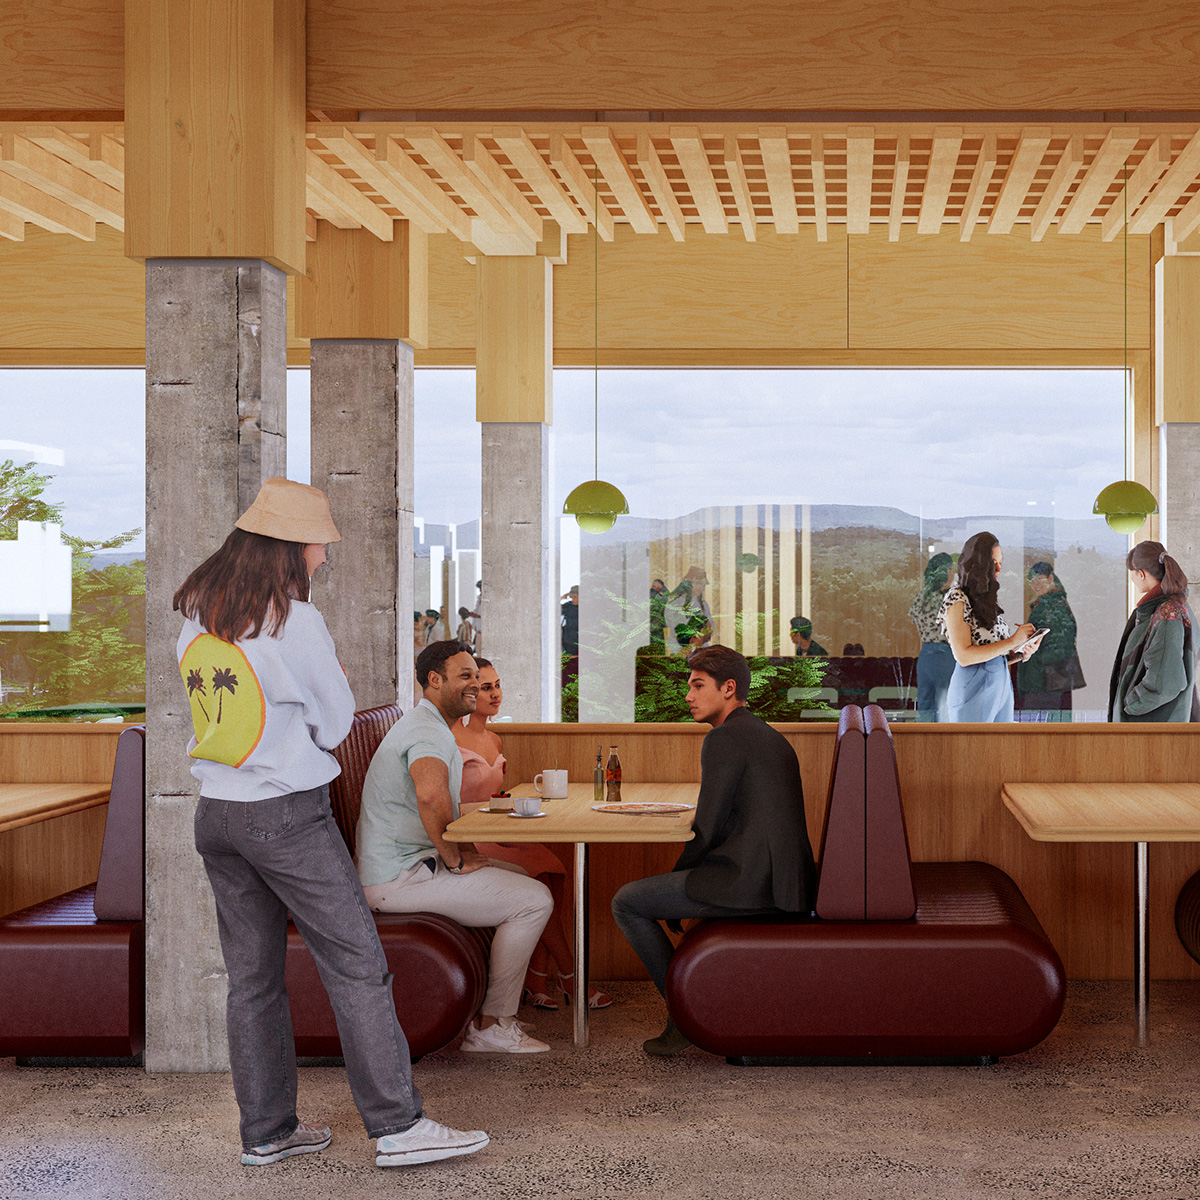 Students eating in a modern dining area with a view towards mountains out a large window in the background